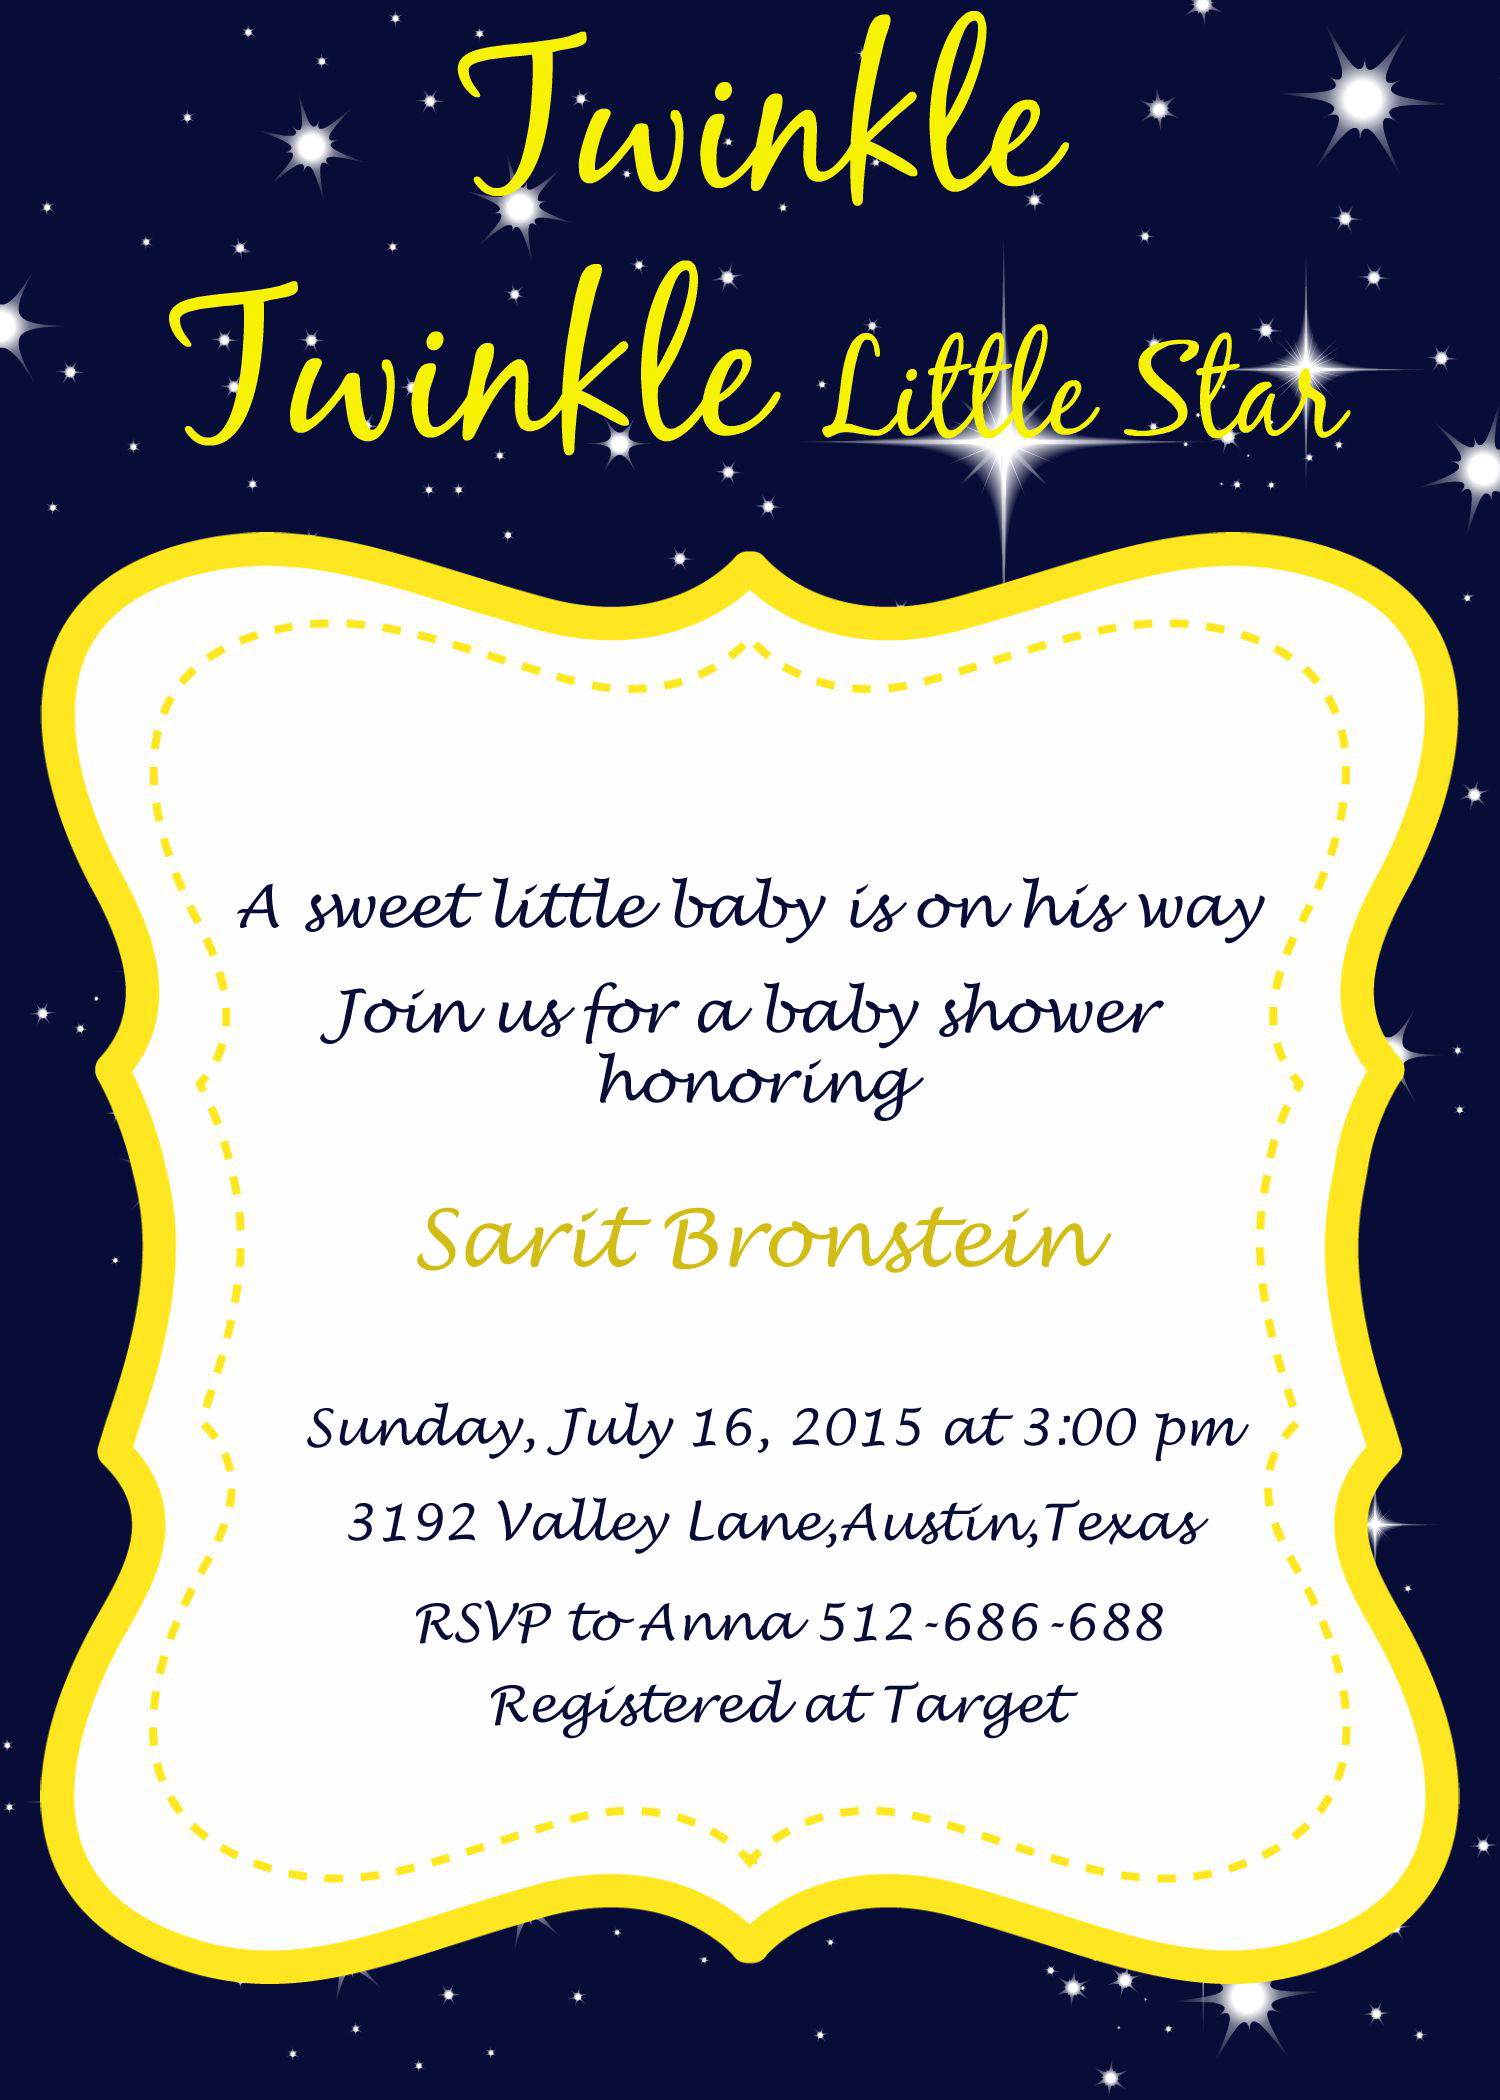 Twinkle Twinkle Baby Shower Ideas - My Practical Baby Shower Guide - Free Printable Twinkle Twinkle Little Star Baby Shower Invitations